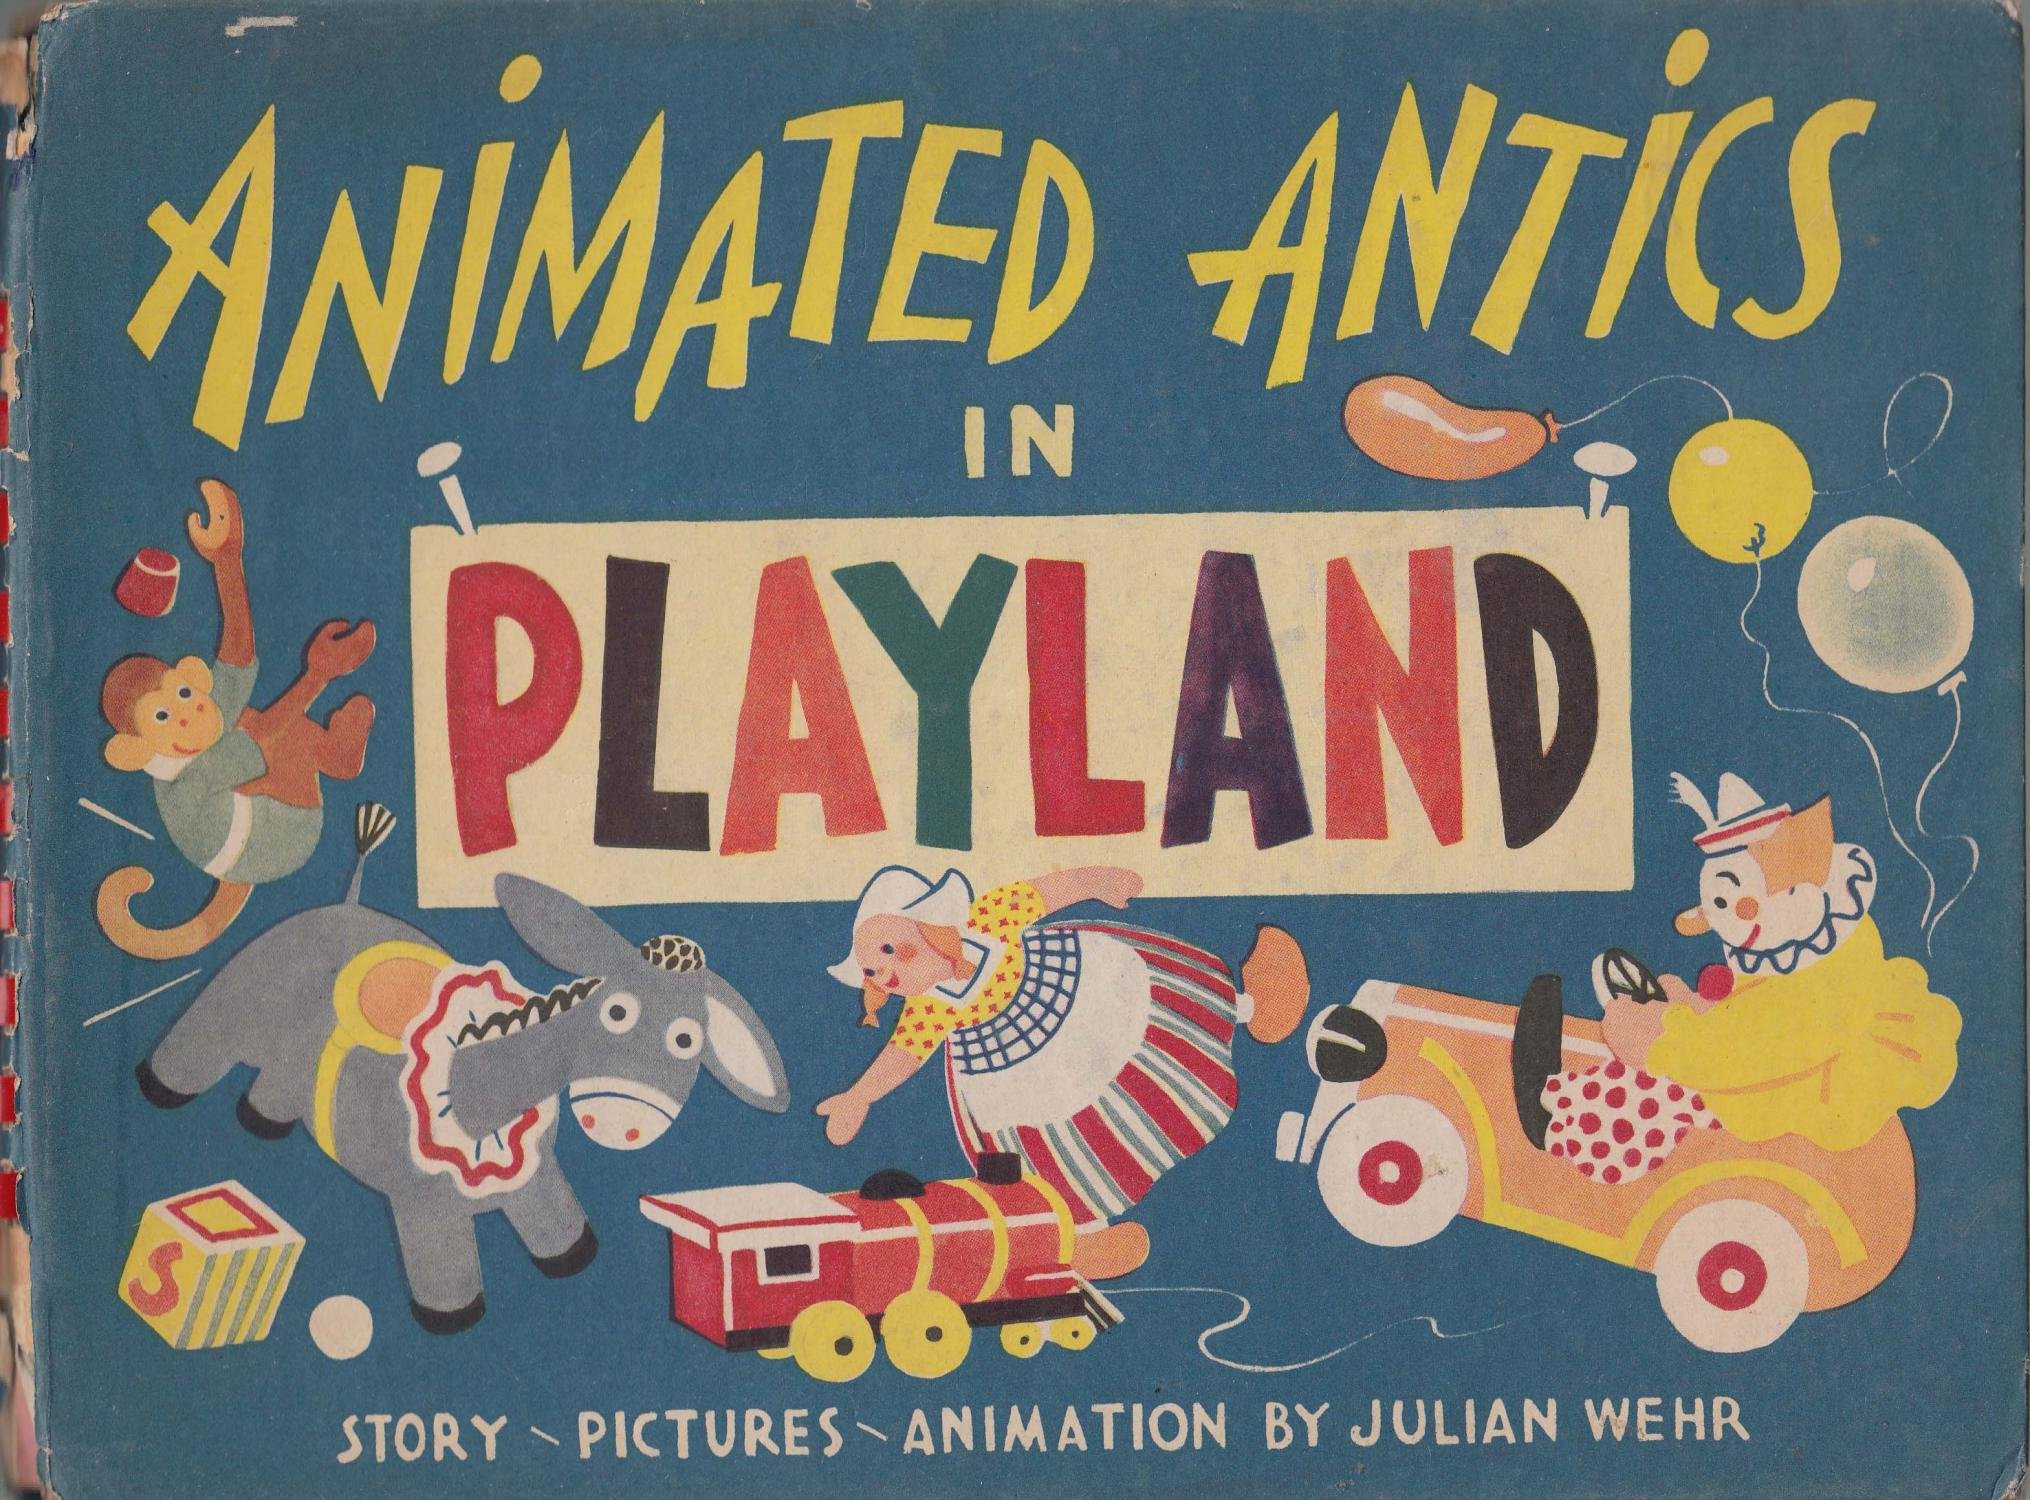 This image shows the book cover for Animated Antics on the Playground by Julian Wehr. The cover is forest green withcolorful children's toys scattered across the front.